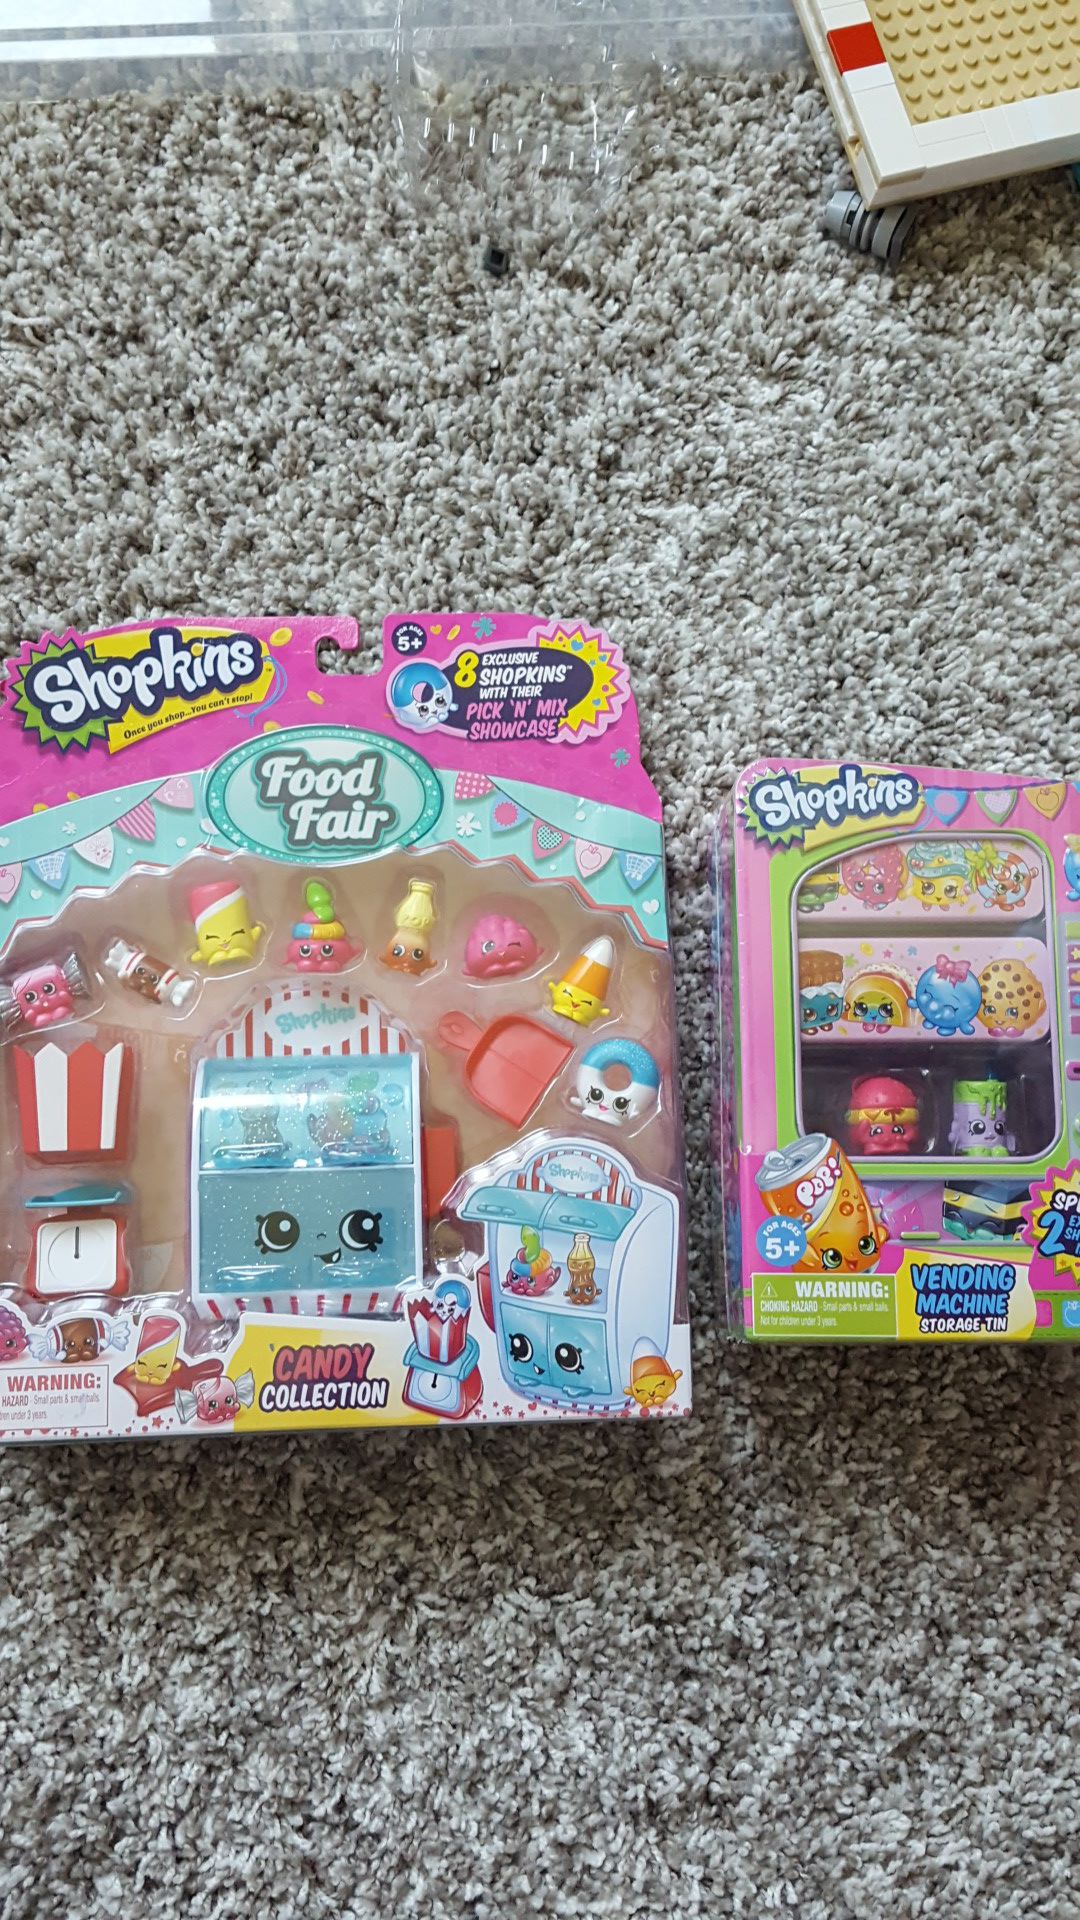 SHOPKINS New Never Opened! Vending machine and Food Fair